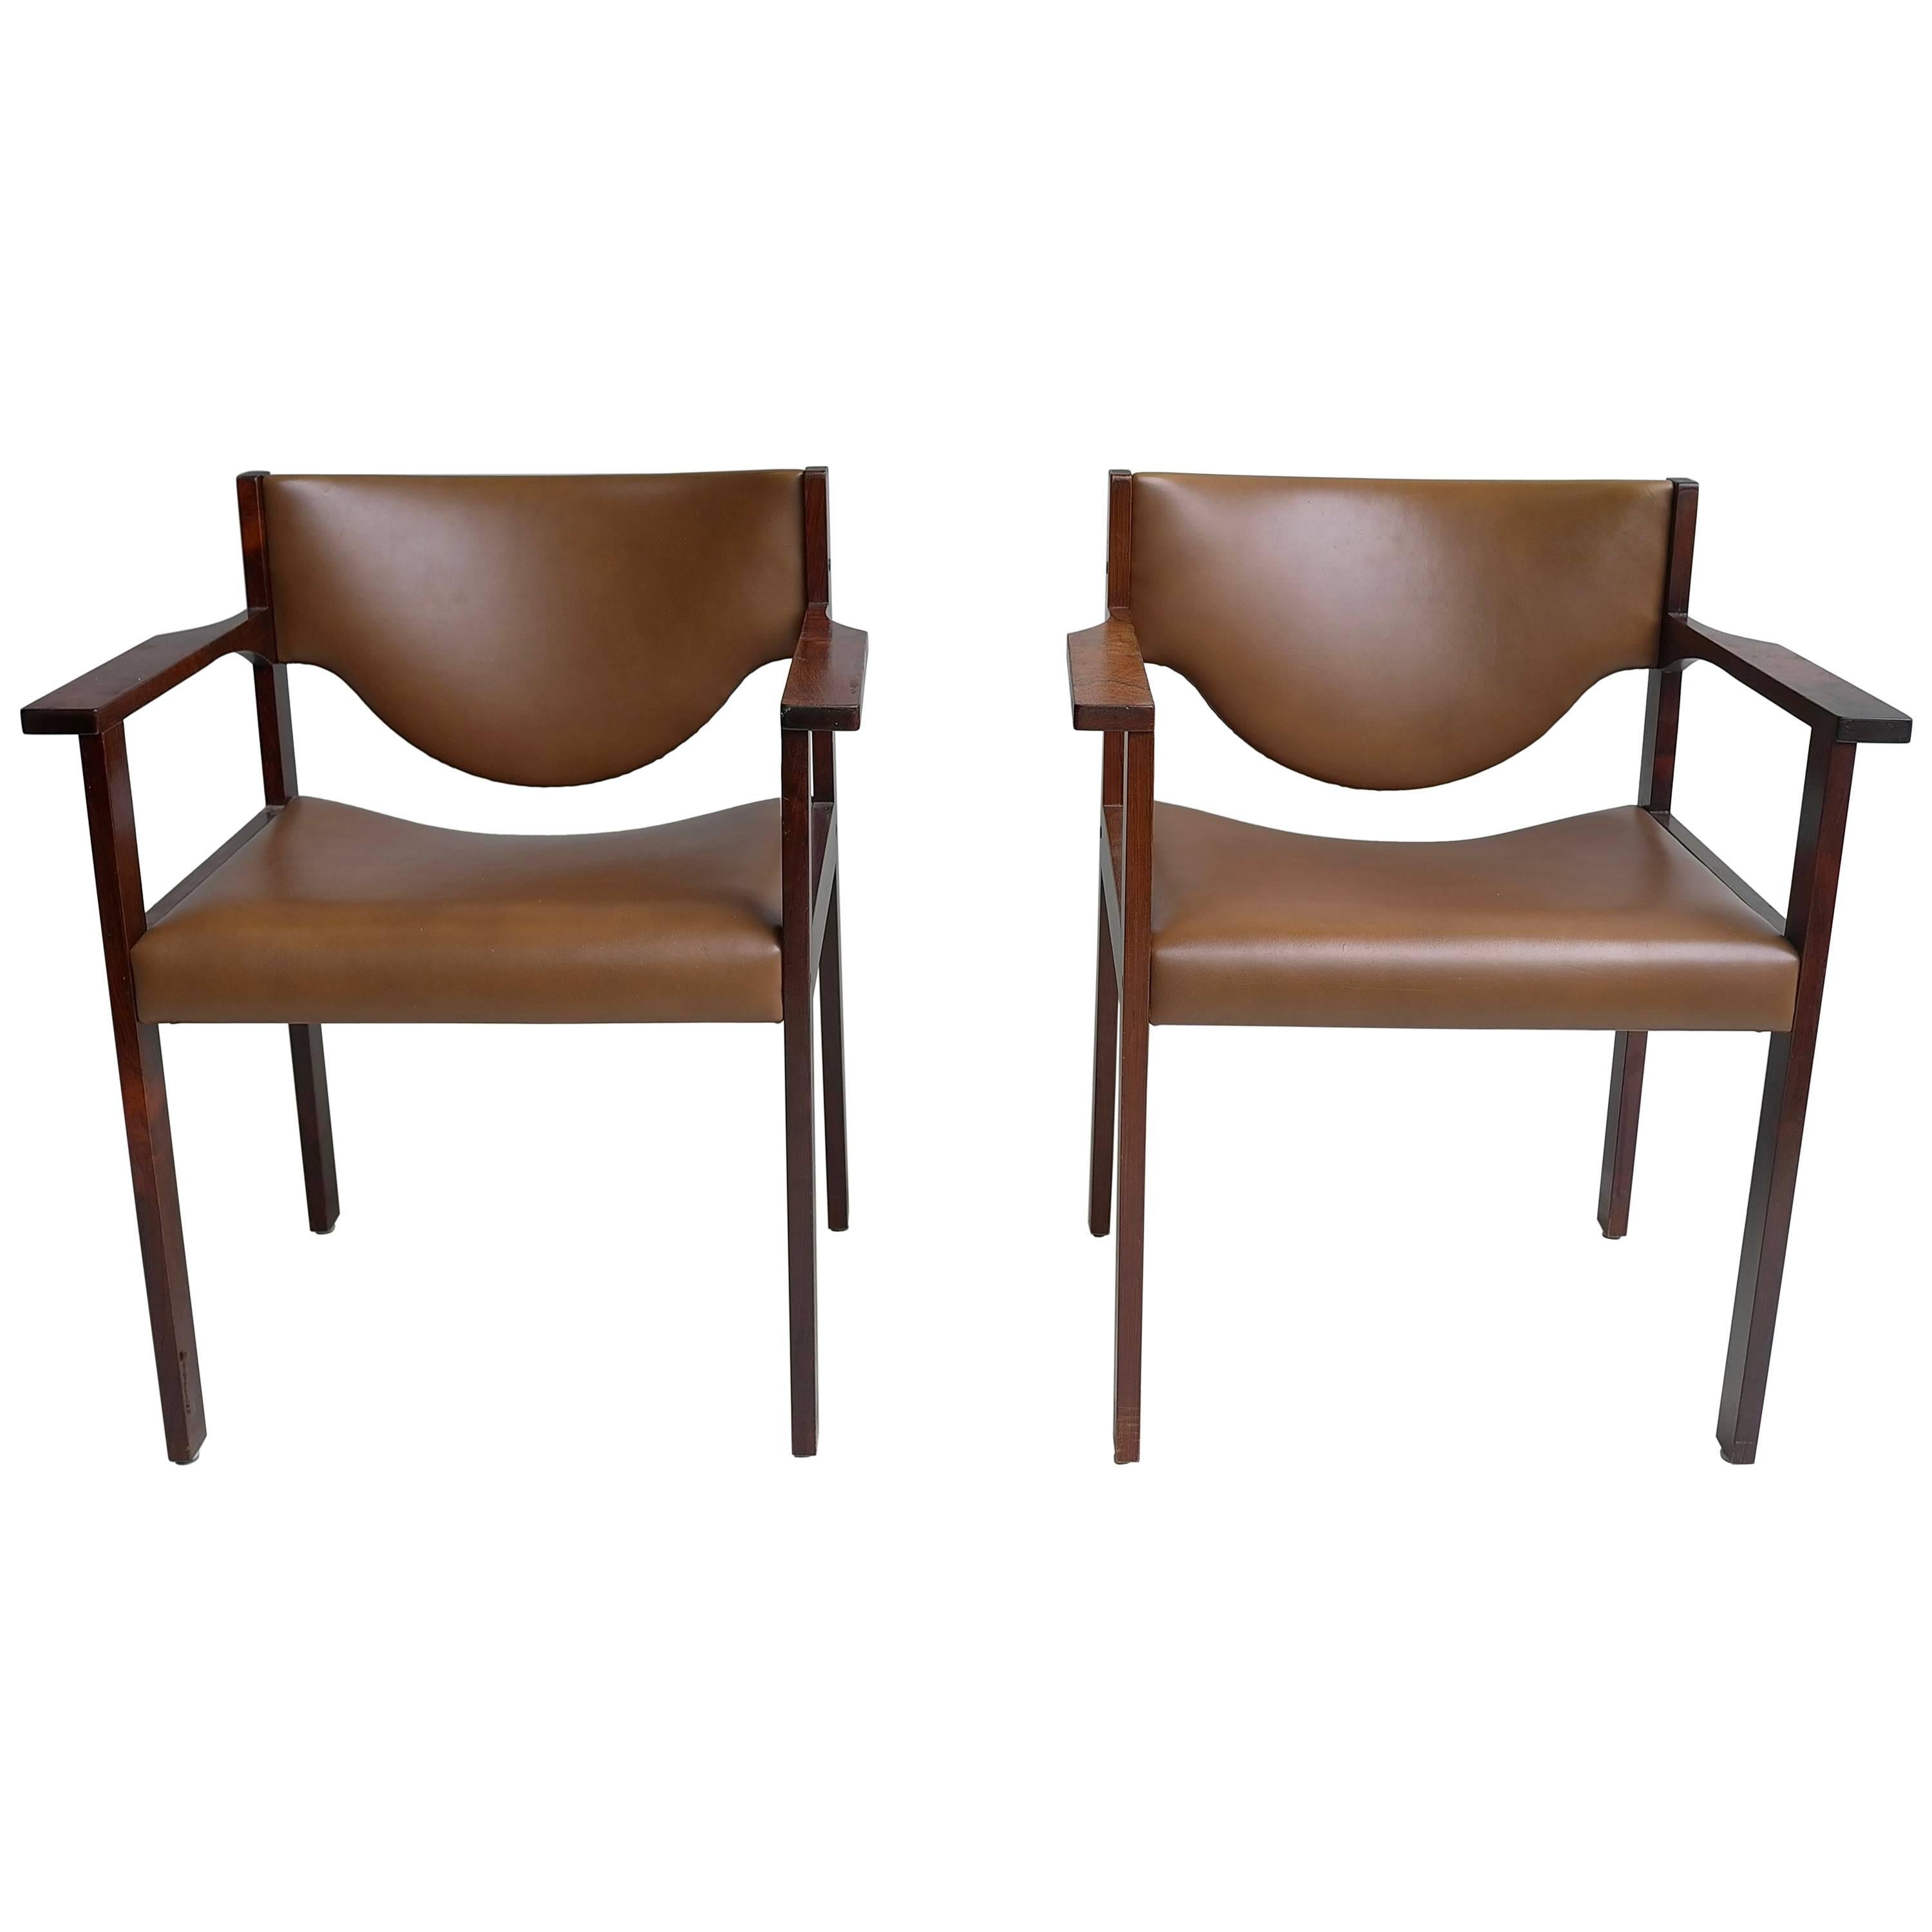 Pair of Danish Desk Chairs in Rosewood and Cognac Leather